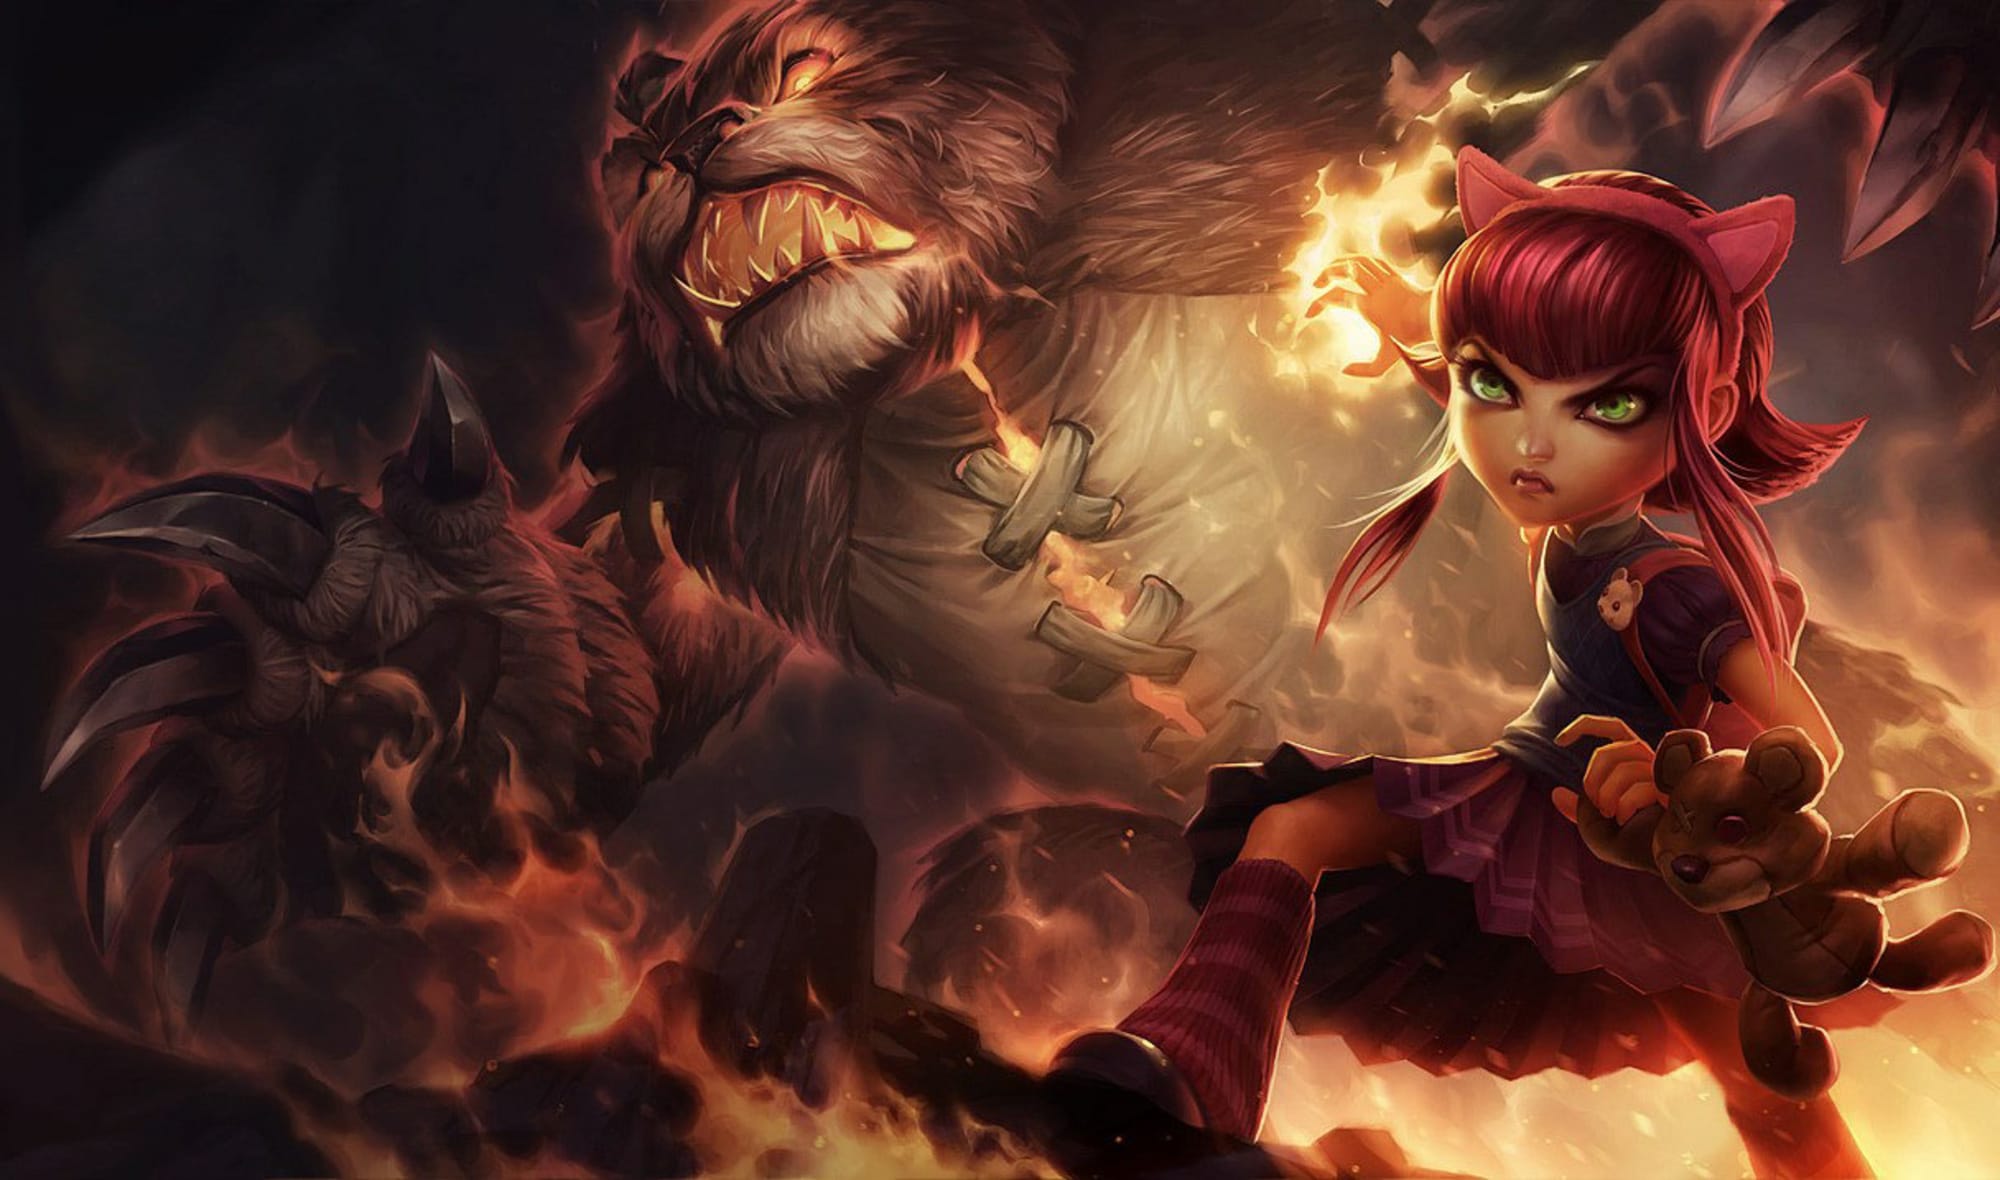 League Of Legends: Wild Rift - Differences Between The Mobile Game And PC  Version